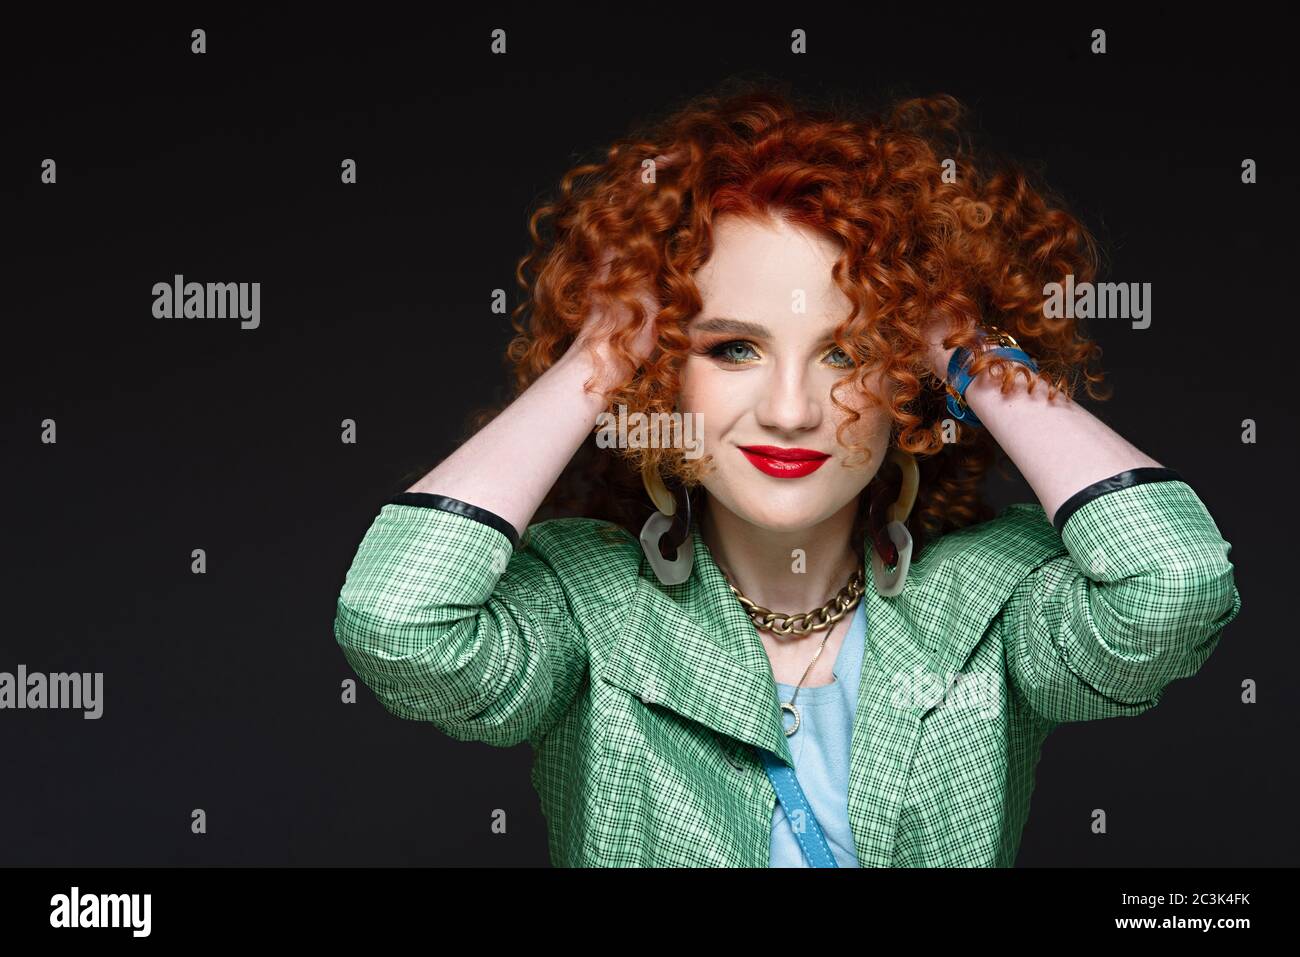 girl with red curly hair smiles, happy man, red lipstick on lips, stylish image Stock Photo